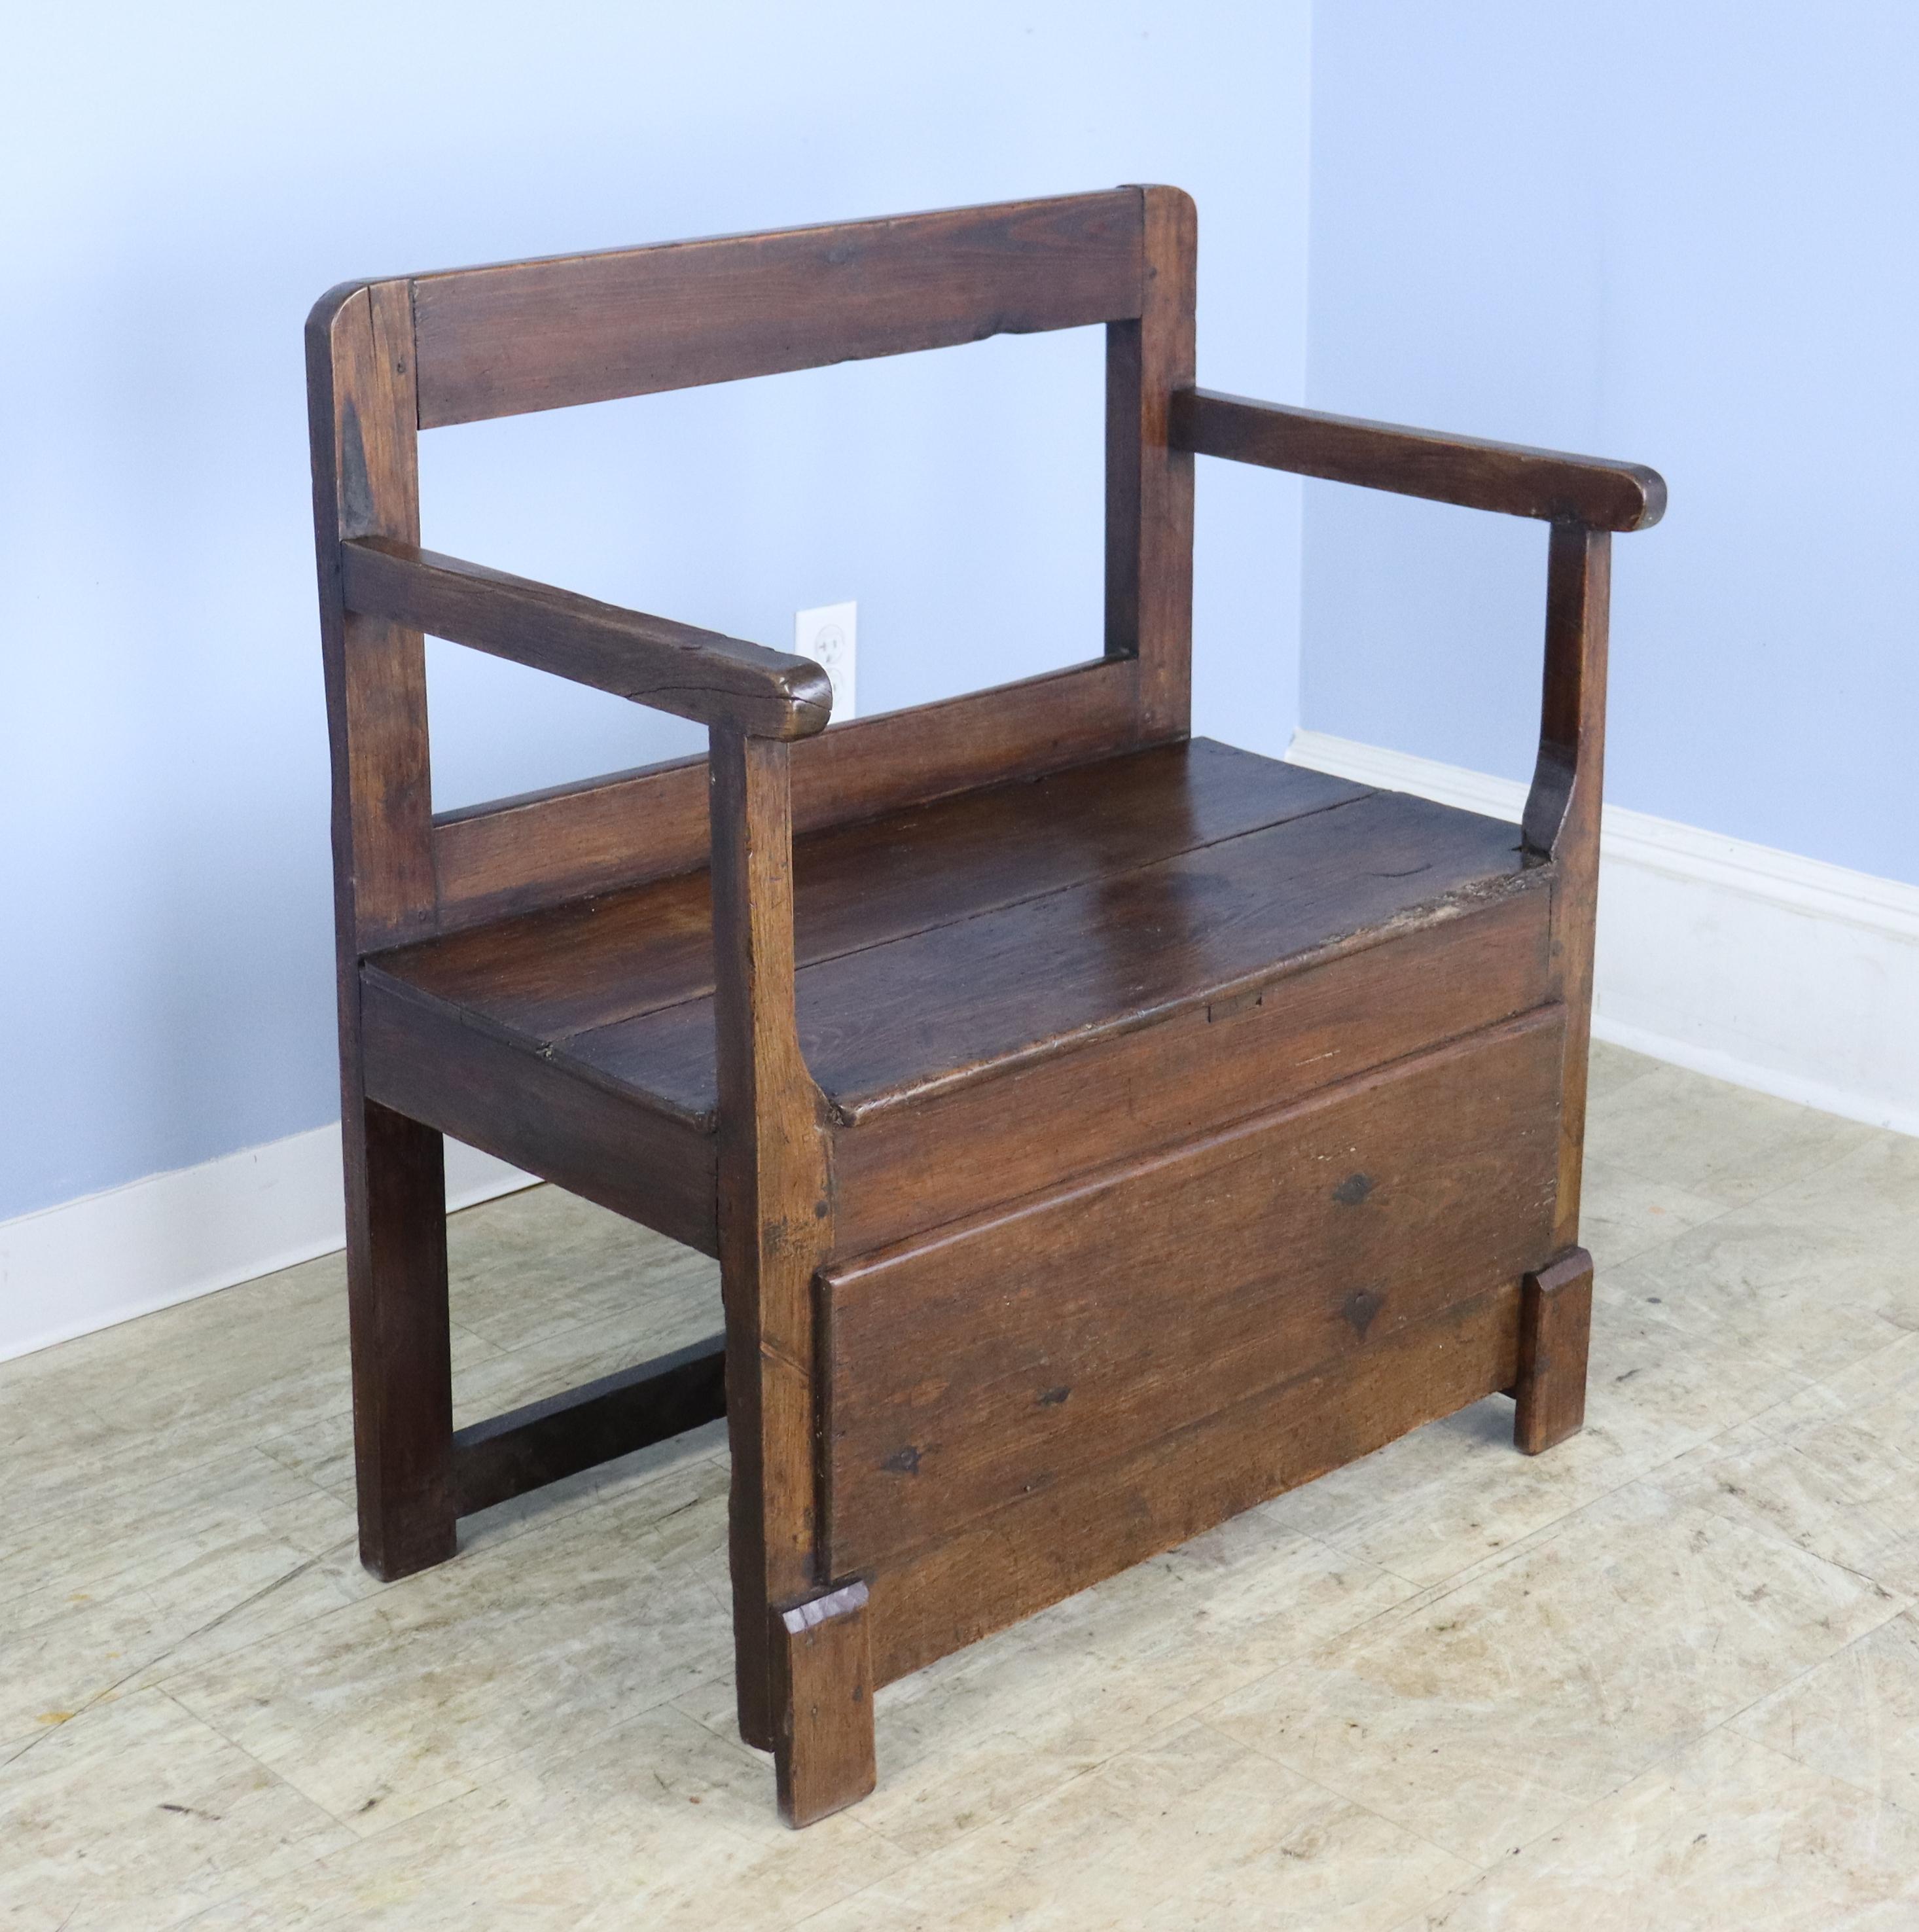 A sweet 19th Century bench with a straight back and charming wooden details at the front.  Lots of good age appropriate wear and a comfortable seat height.